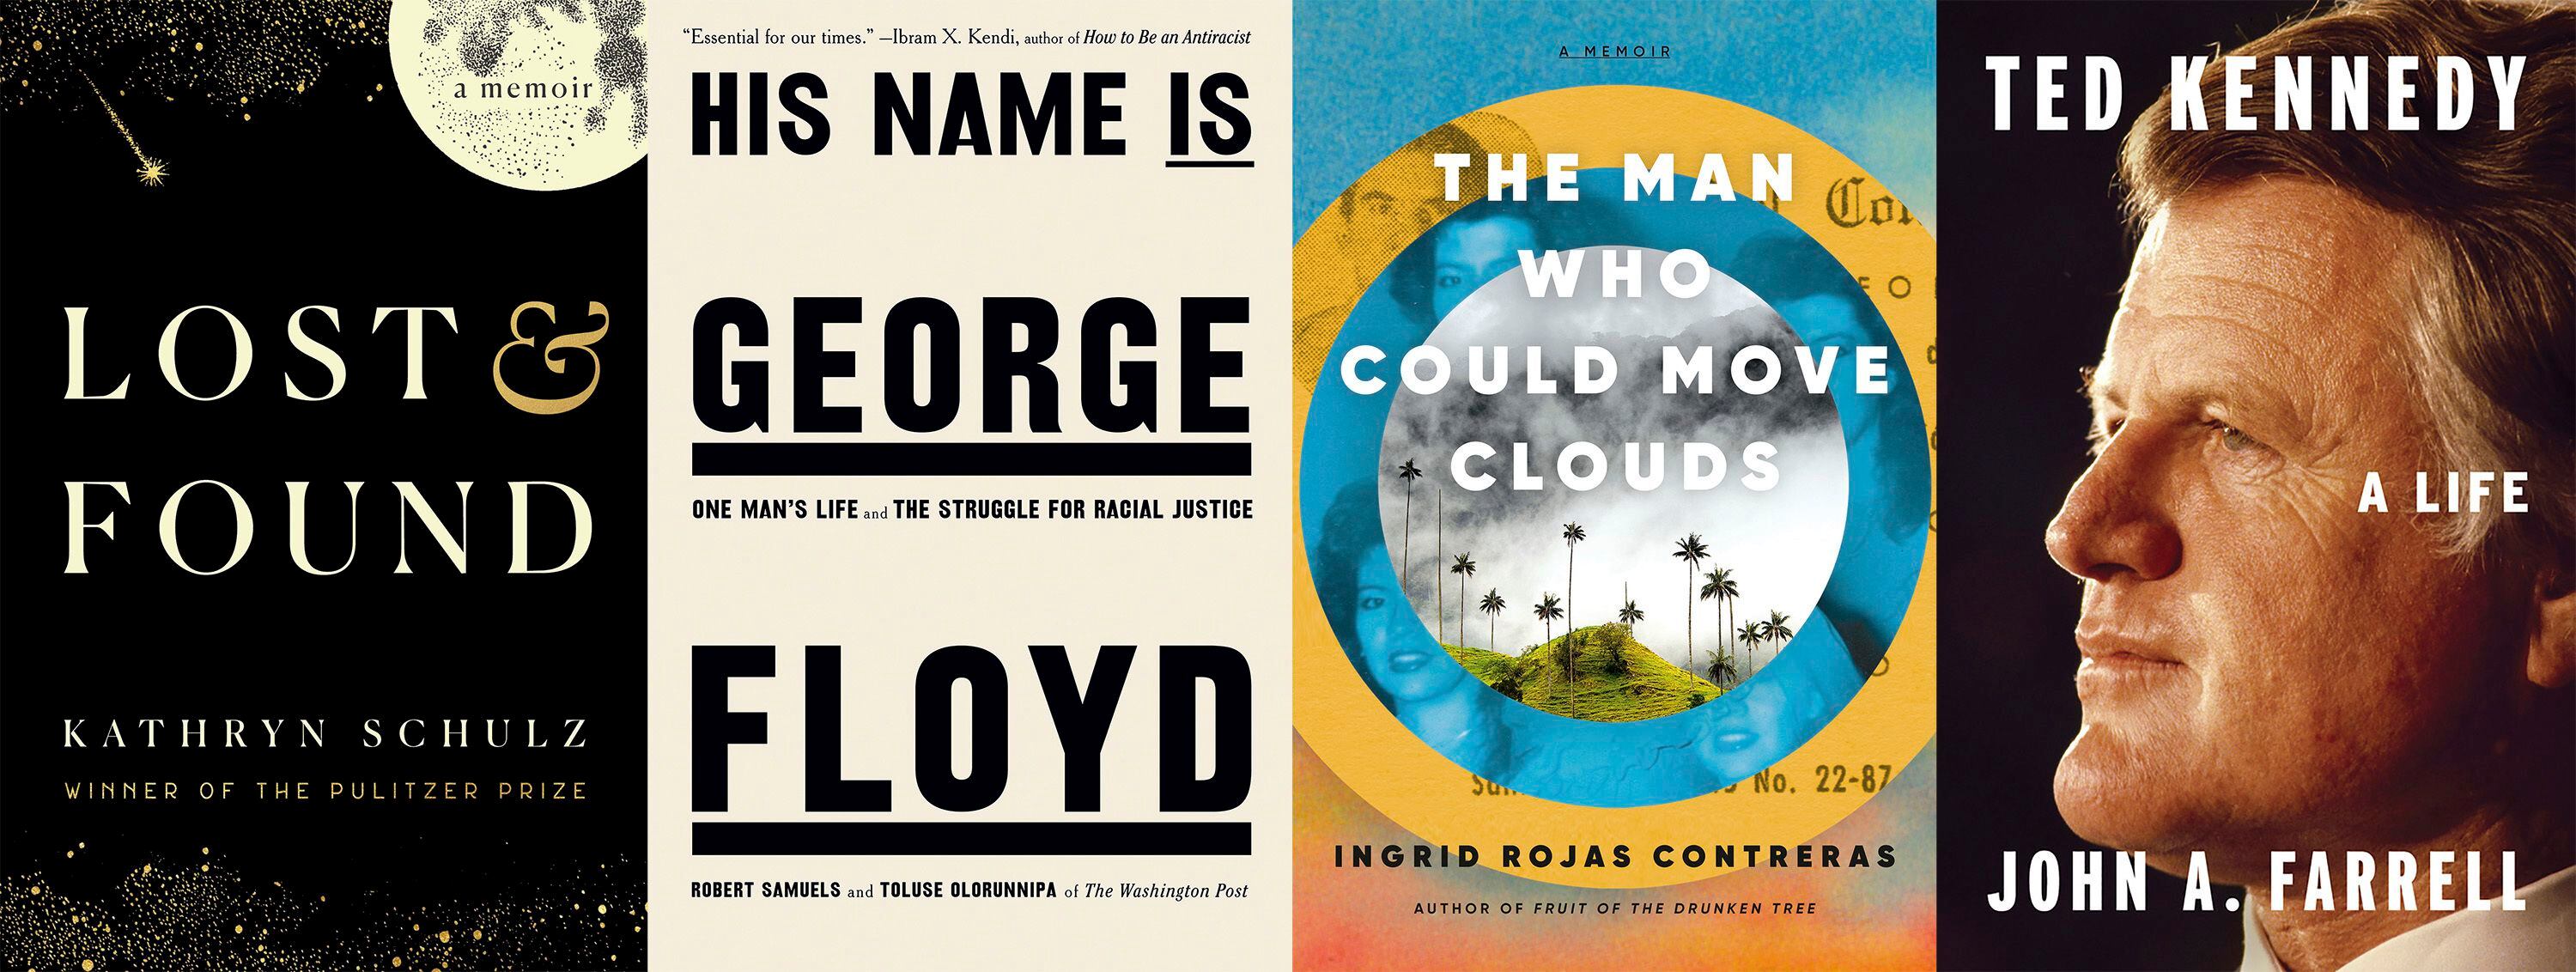 George Floyd biography among National Book Award nominees